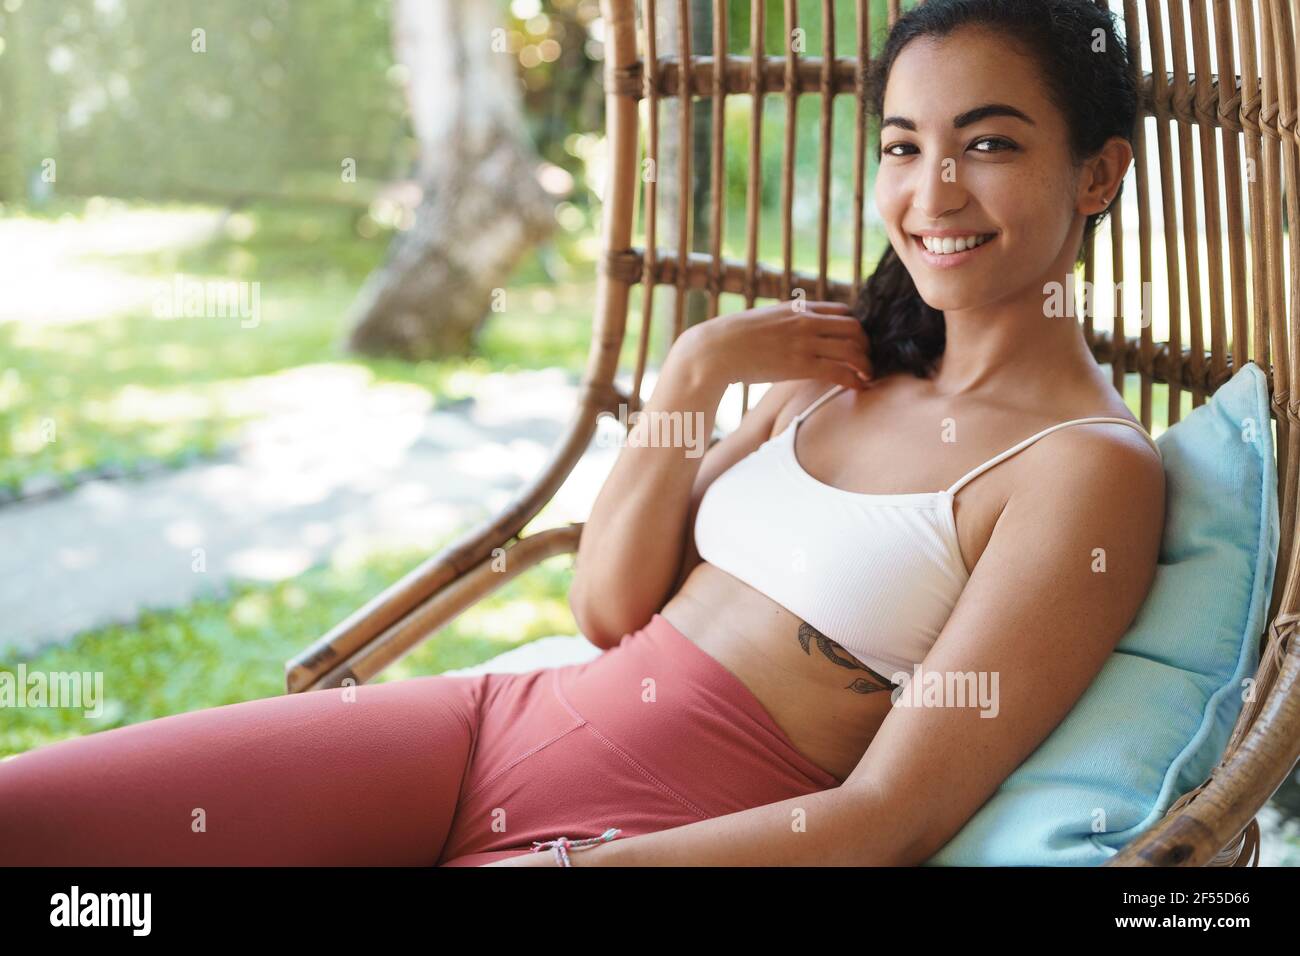 Woman feeling energized and upbeat after morning yoga exercises in garden.  Attractive smiling female in sports bra, leggings lying rattan armchair  Stock Photo - Alamy